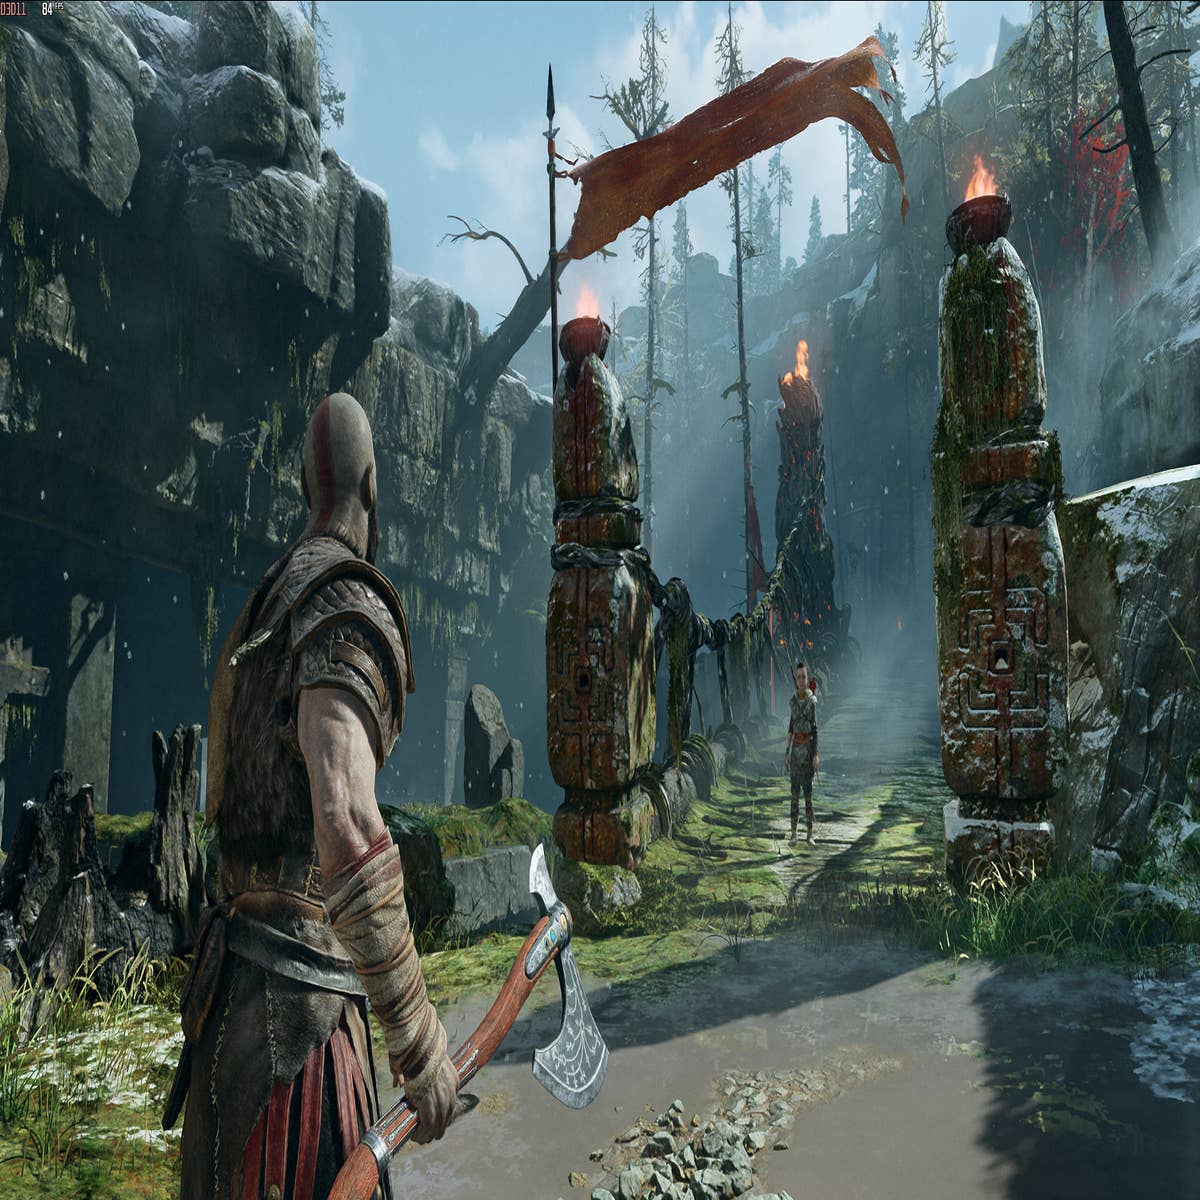 God of War PC release time